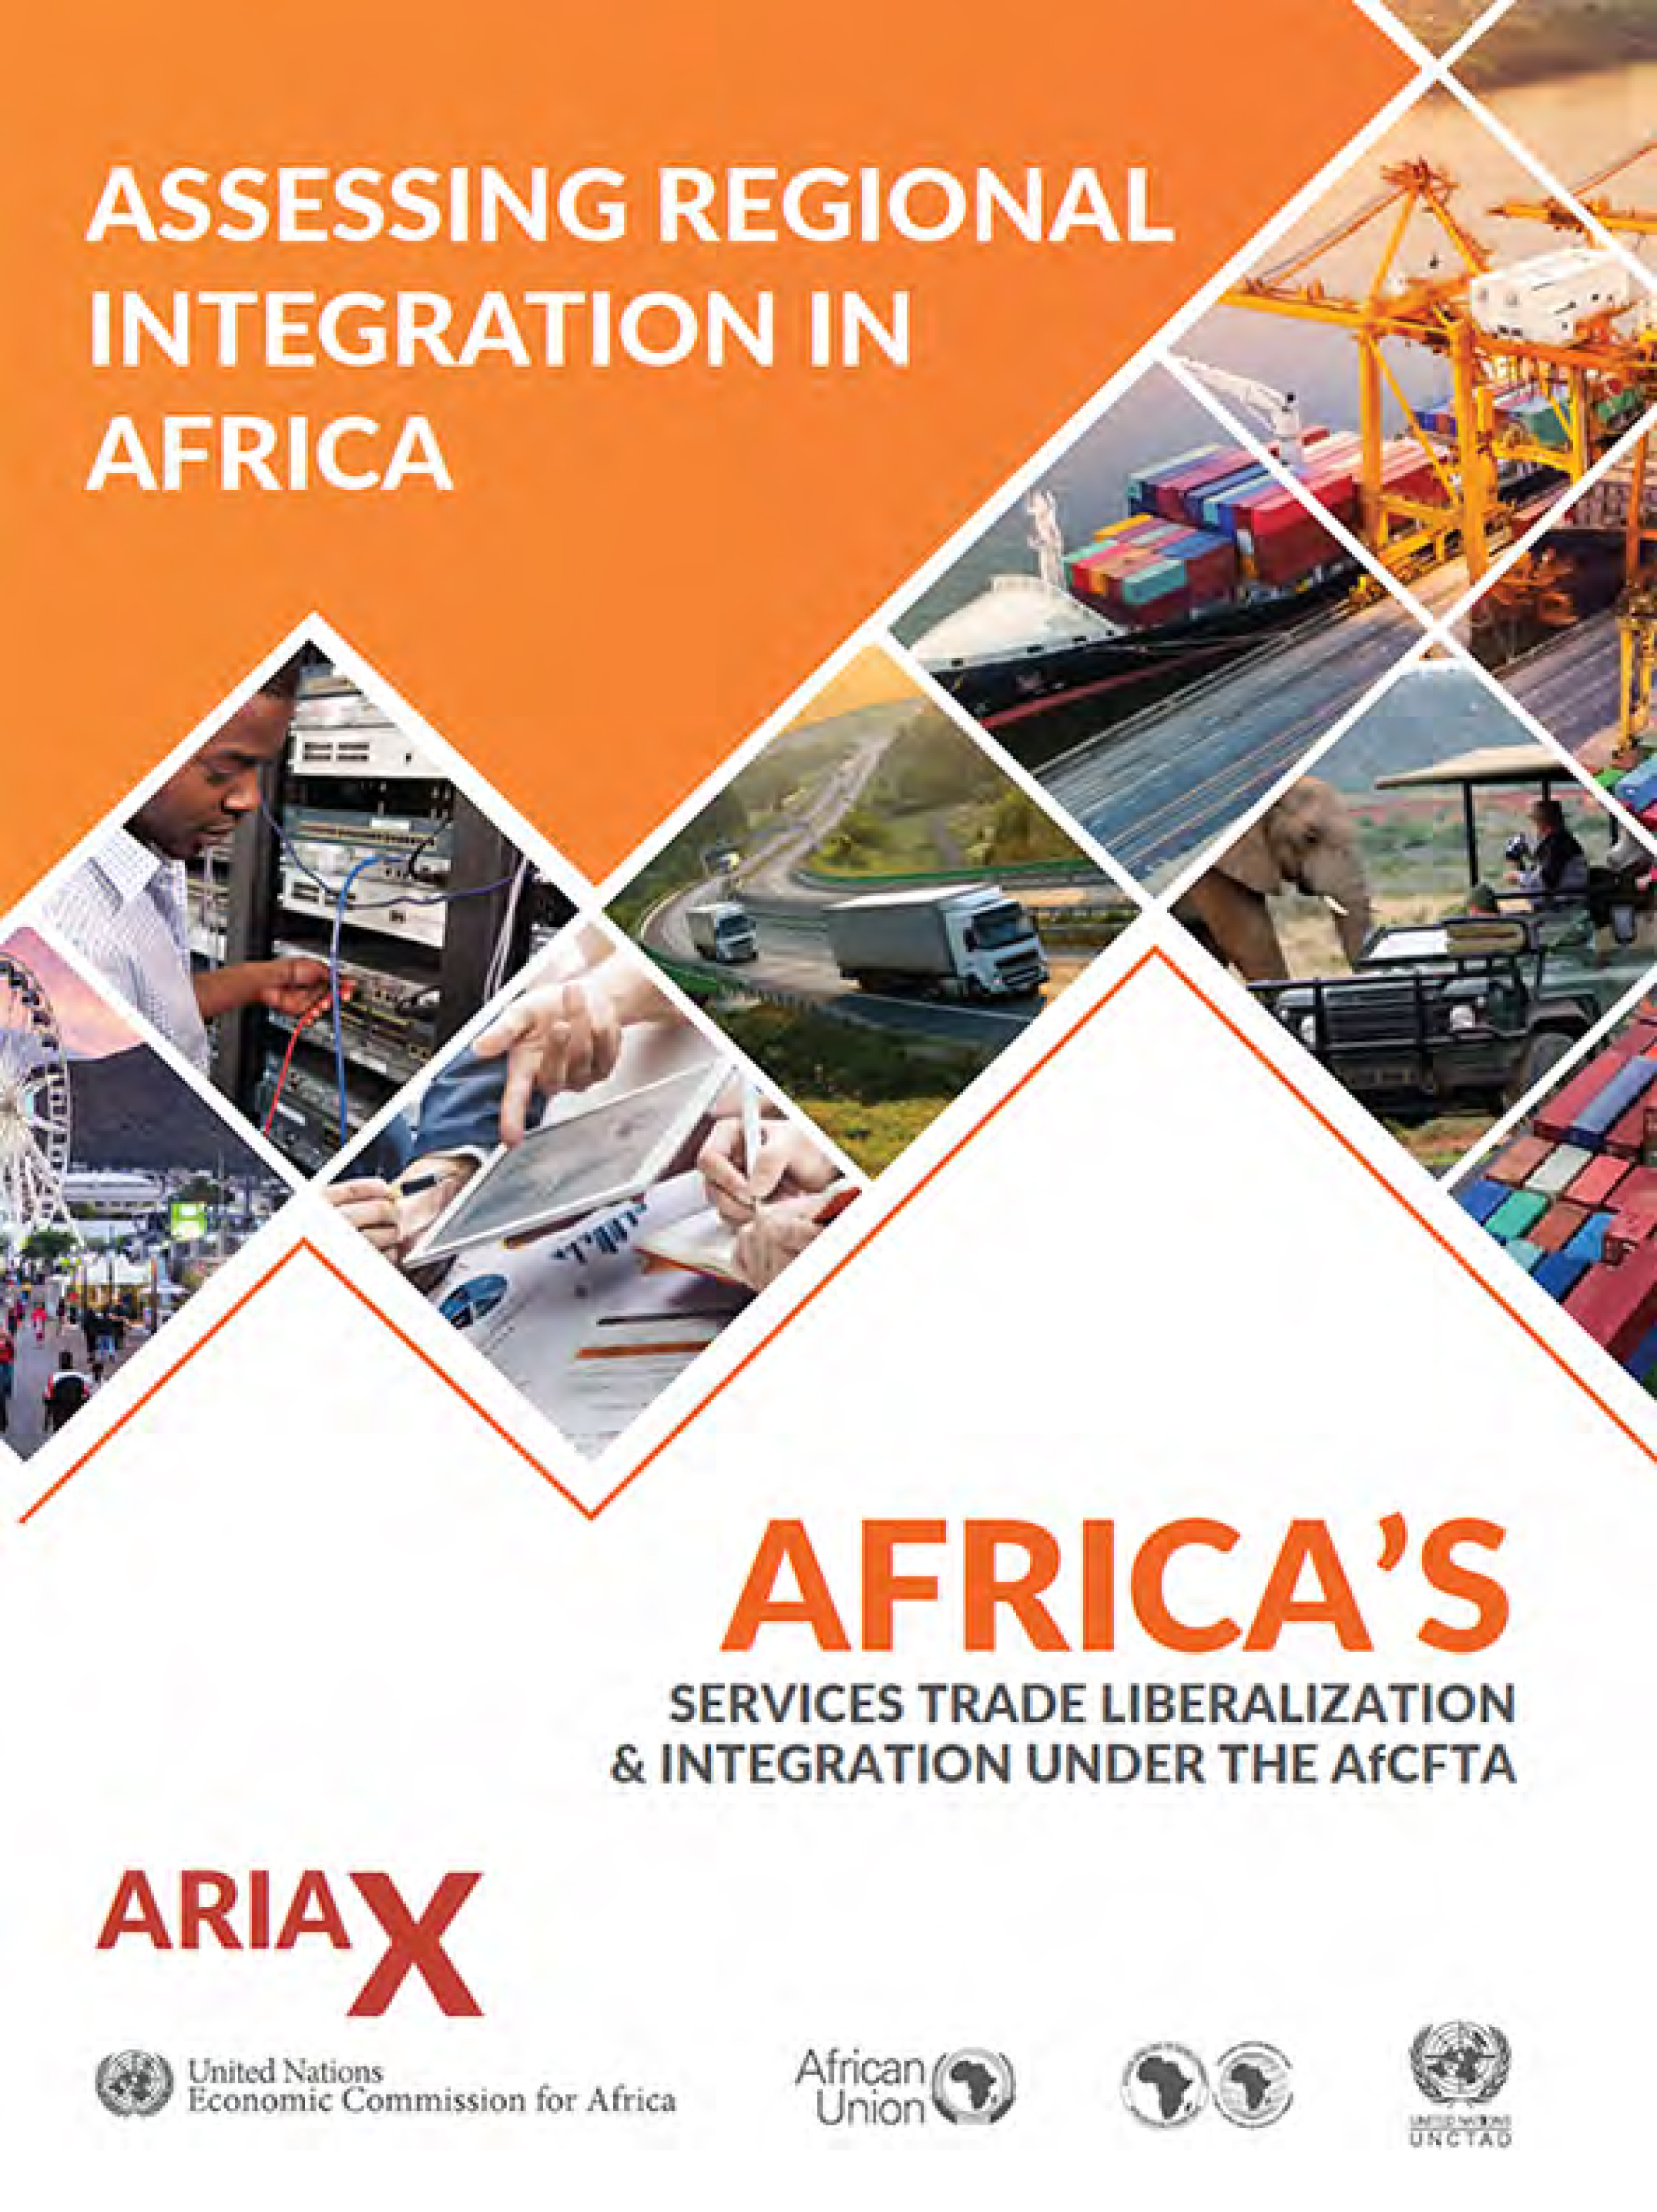 image of Executive Summary, Key findings, Policy recommendationsand road-map/guide to ARIA X